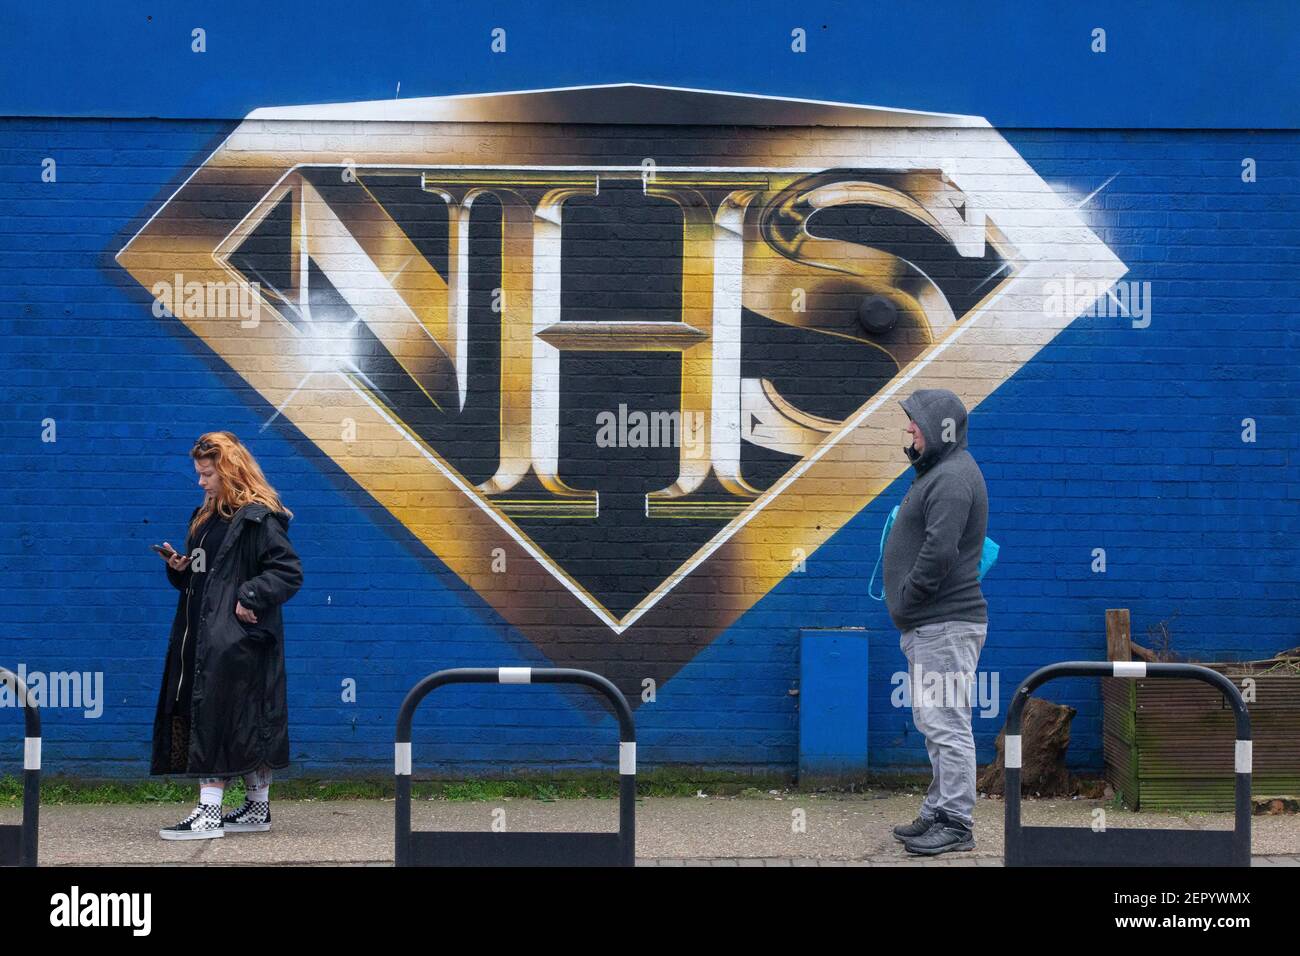 London, UK, 28 February 2021: A mural in Tulse Hill depicts the NHS logo in the style of a superhero badge. Passers-by take exercise or queue for the Co-op store round the corner, some wearing face masks and all socially distancing. Anna Watson/Alamy Live News Stock Photo